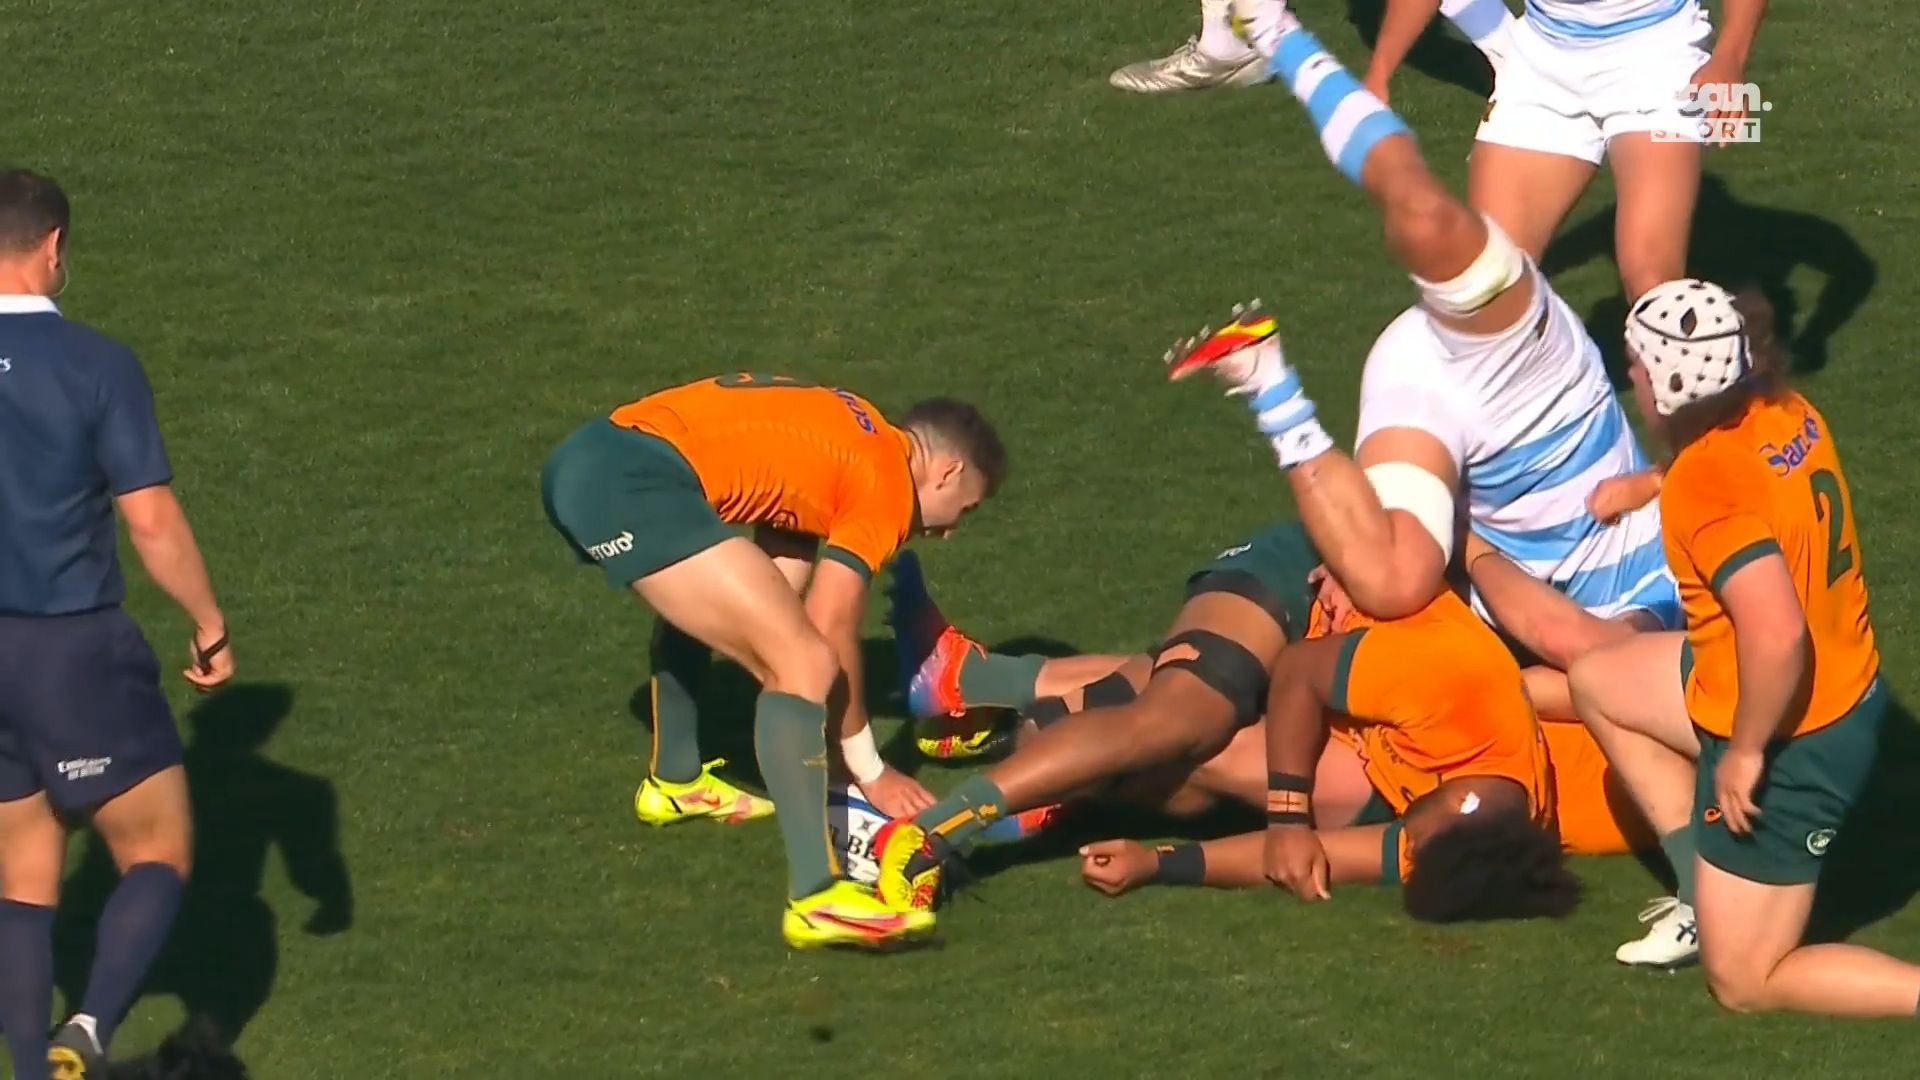 Wallabies robbed of try after 'absurd' penalty against captain James Slipper